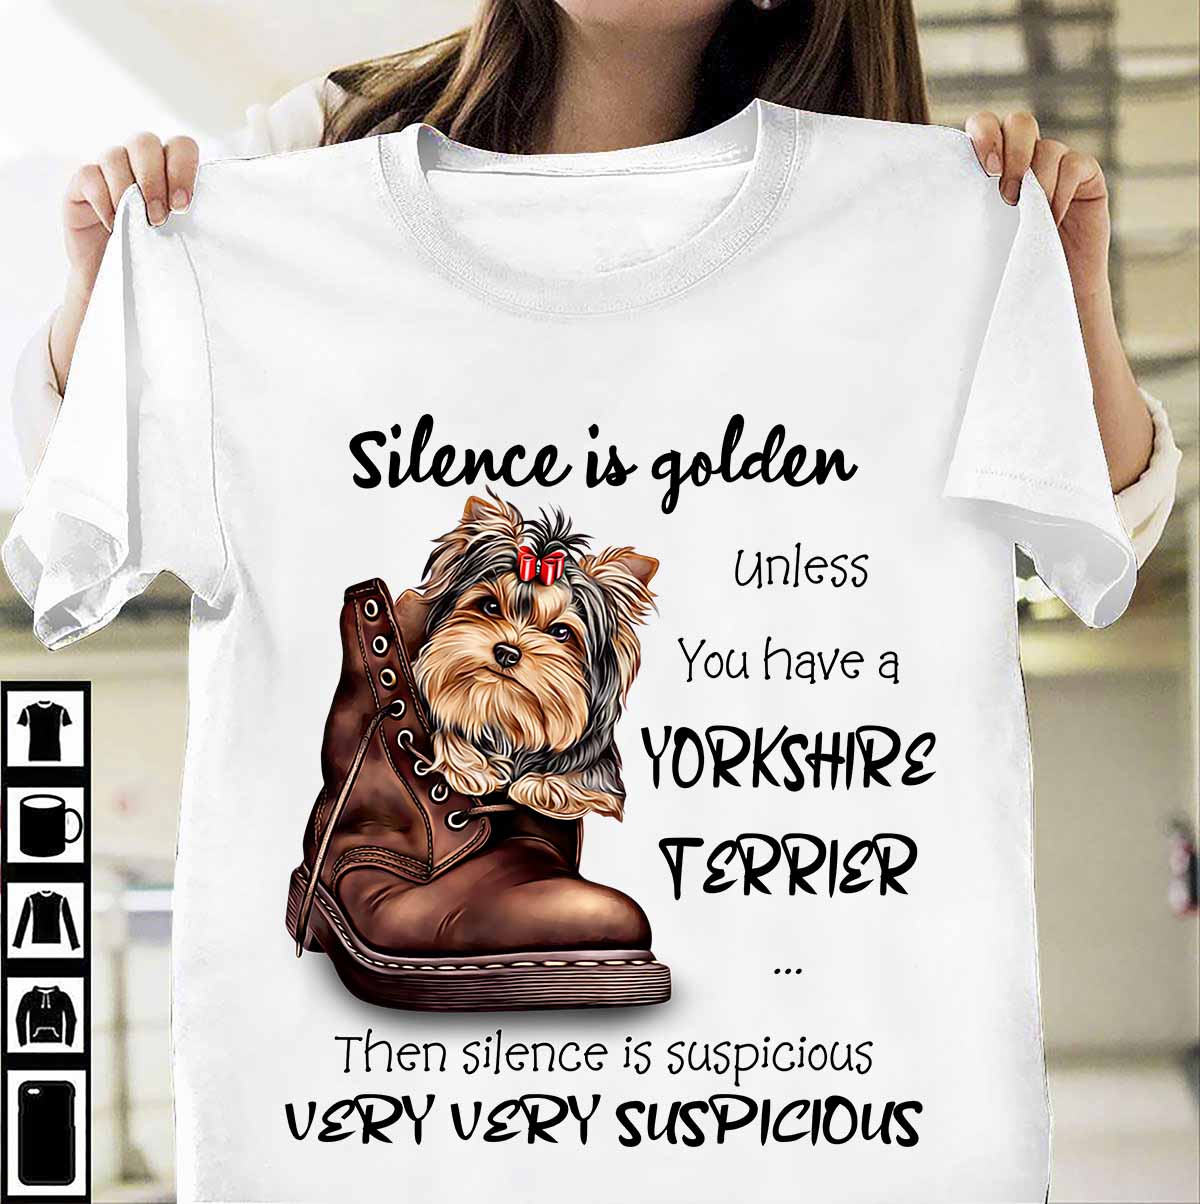 Silence is golden unless you have a Yorkshire terrier then silence is suspicious